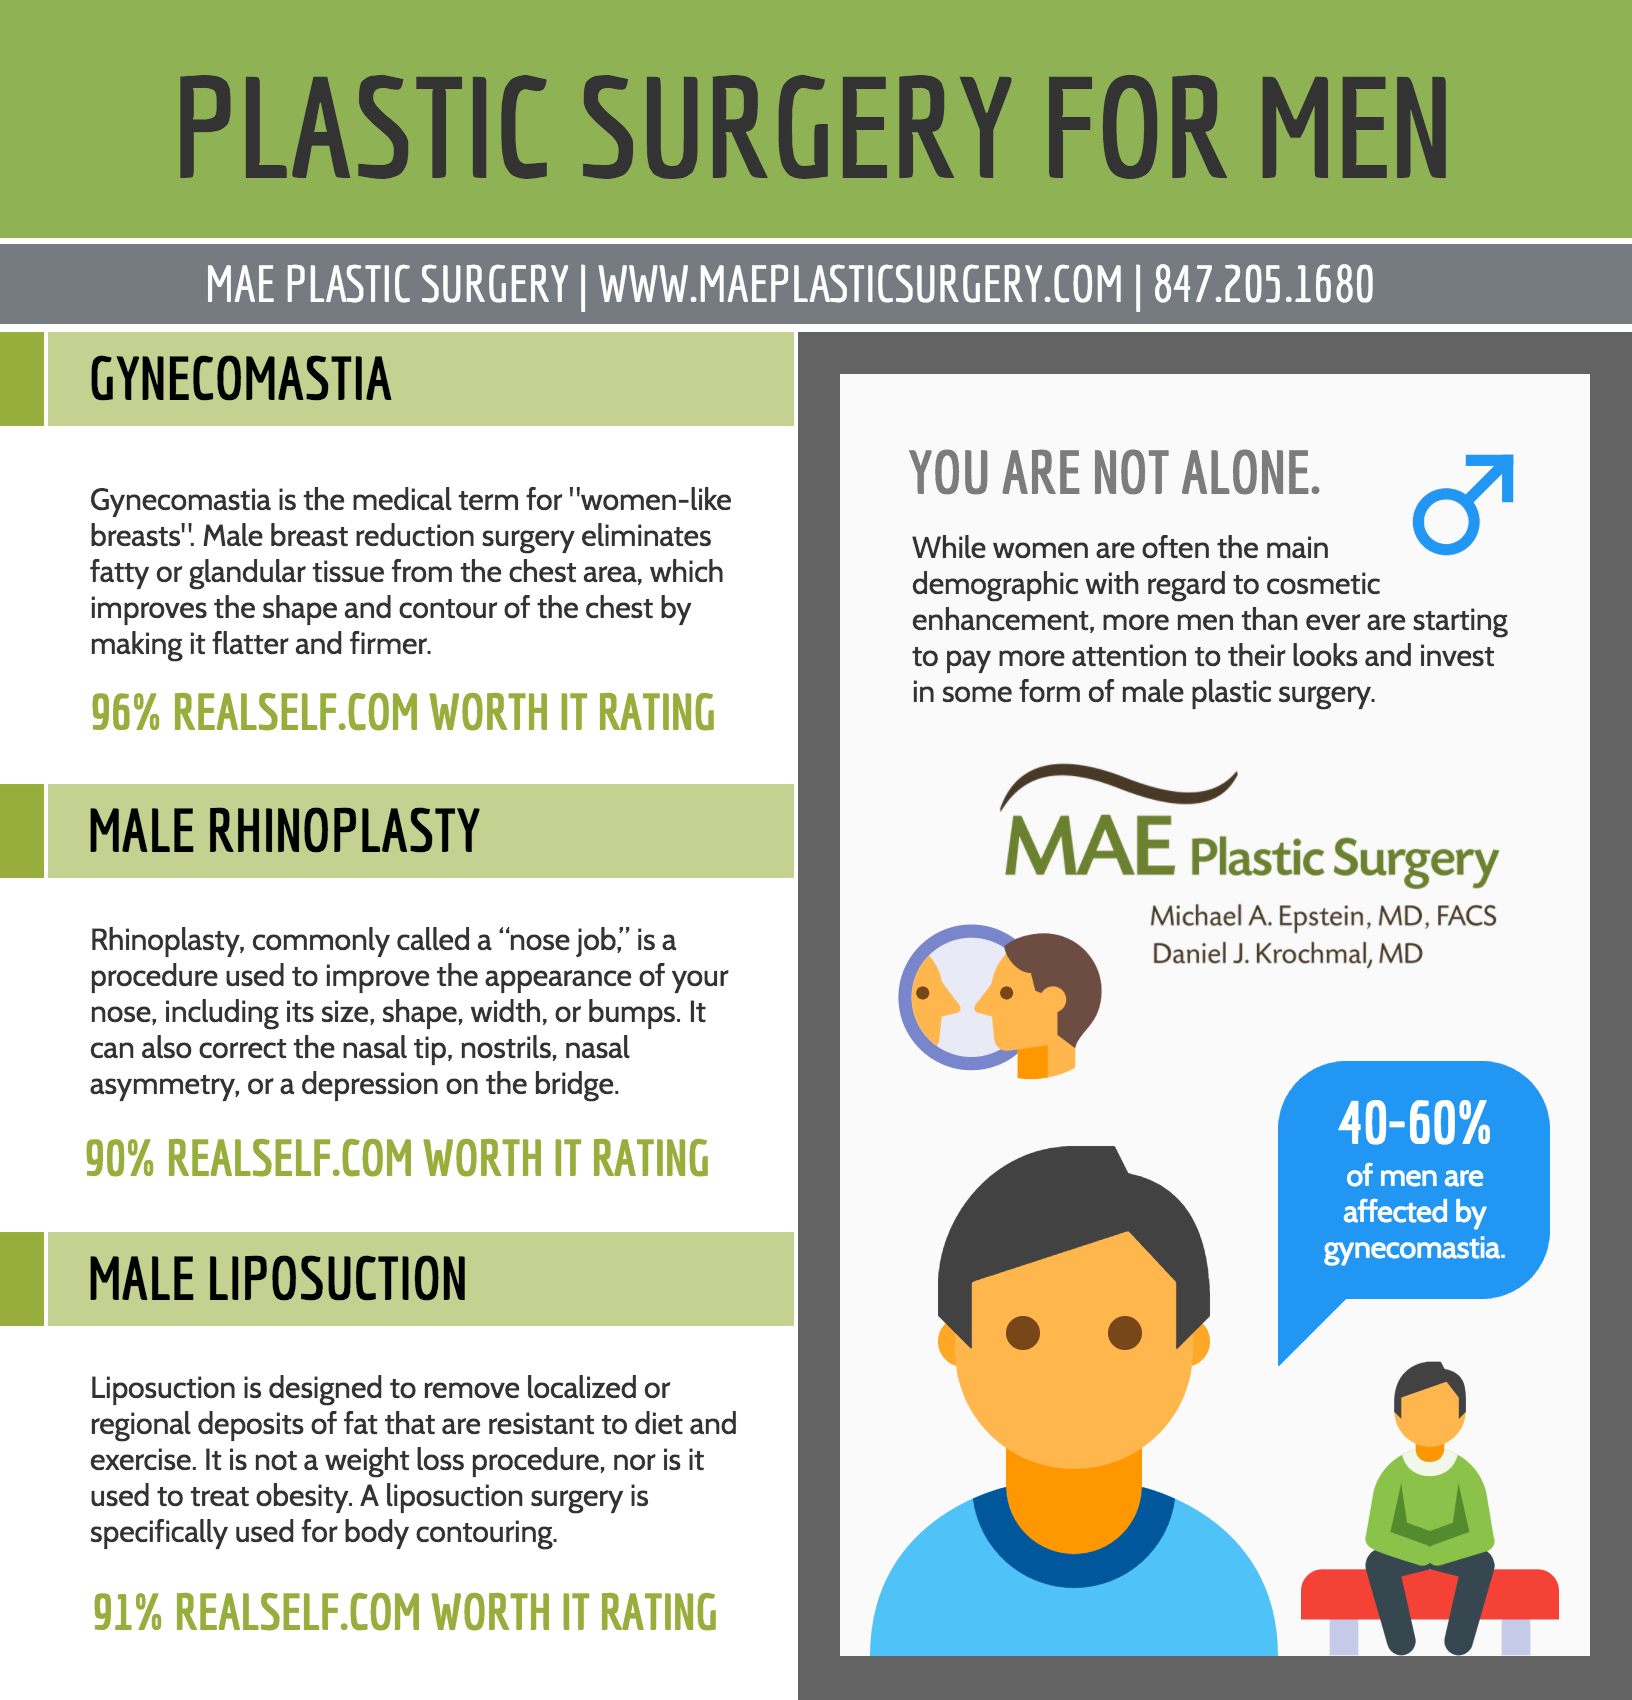 An Infographic on Plastic Surgery for Men MAE Plastic